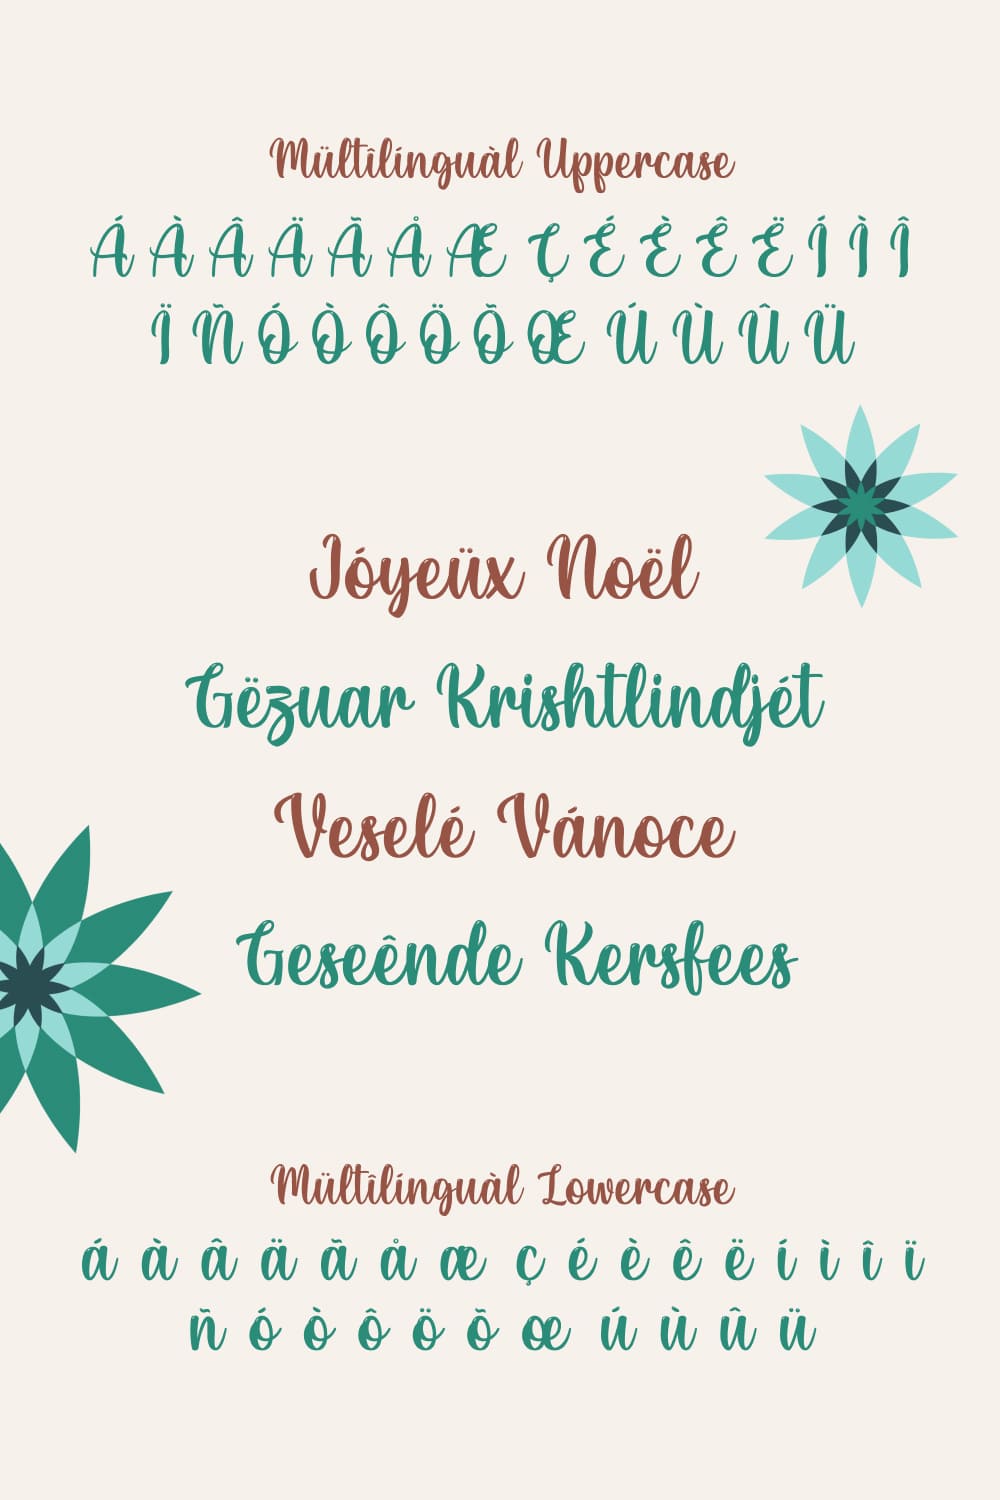 So festive font with Christmas elements.